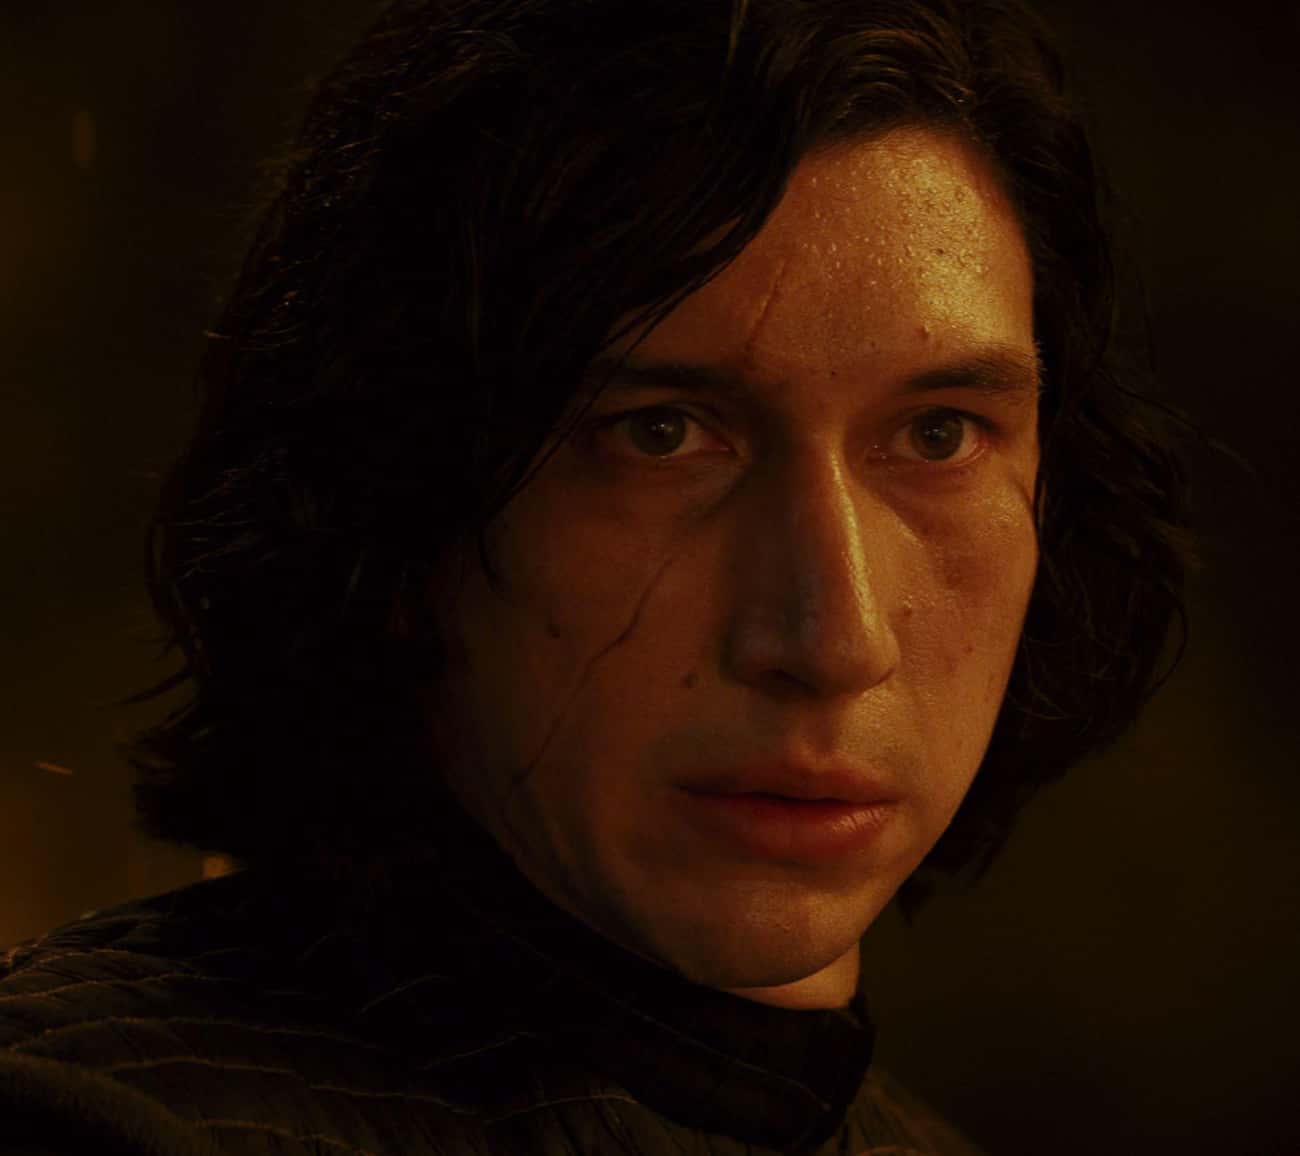 The Connection Between Kylo And Rey Cannot Be Severed